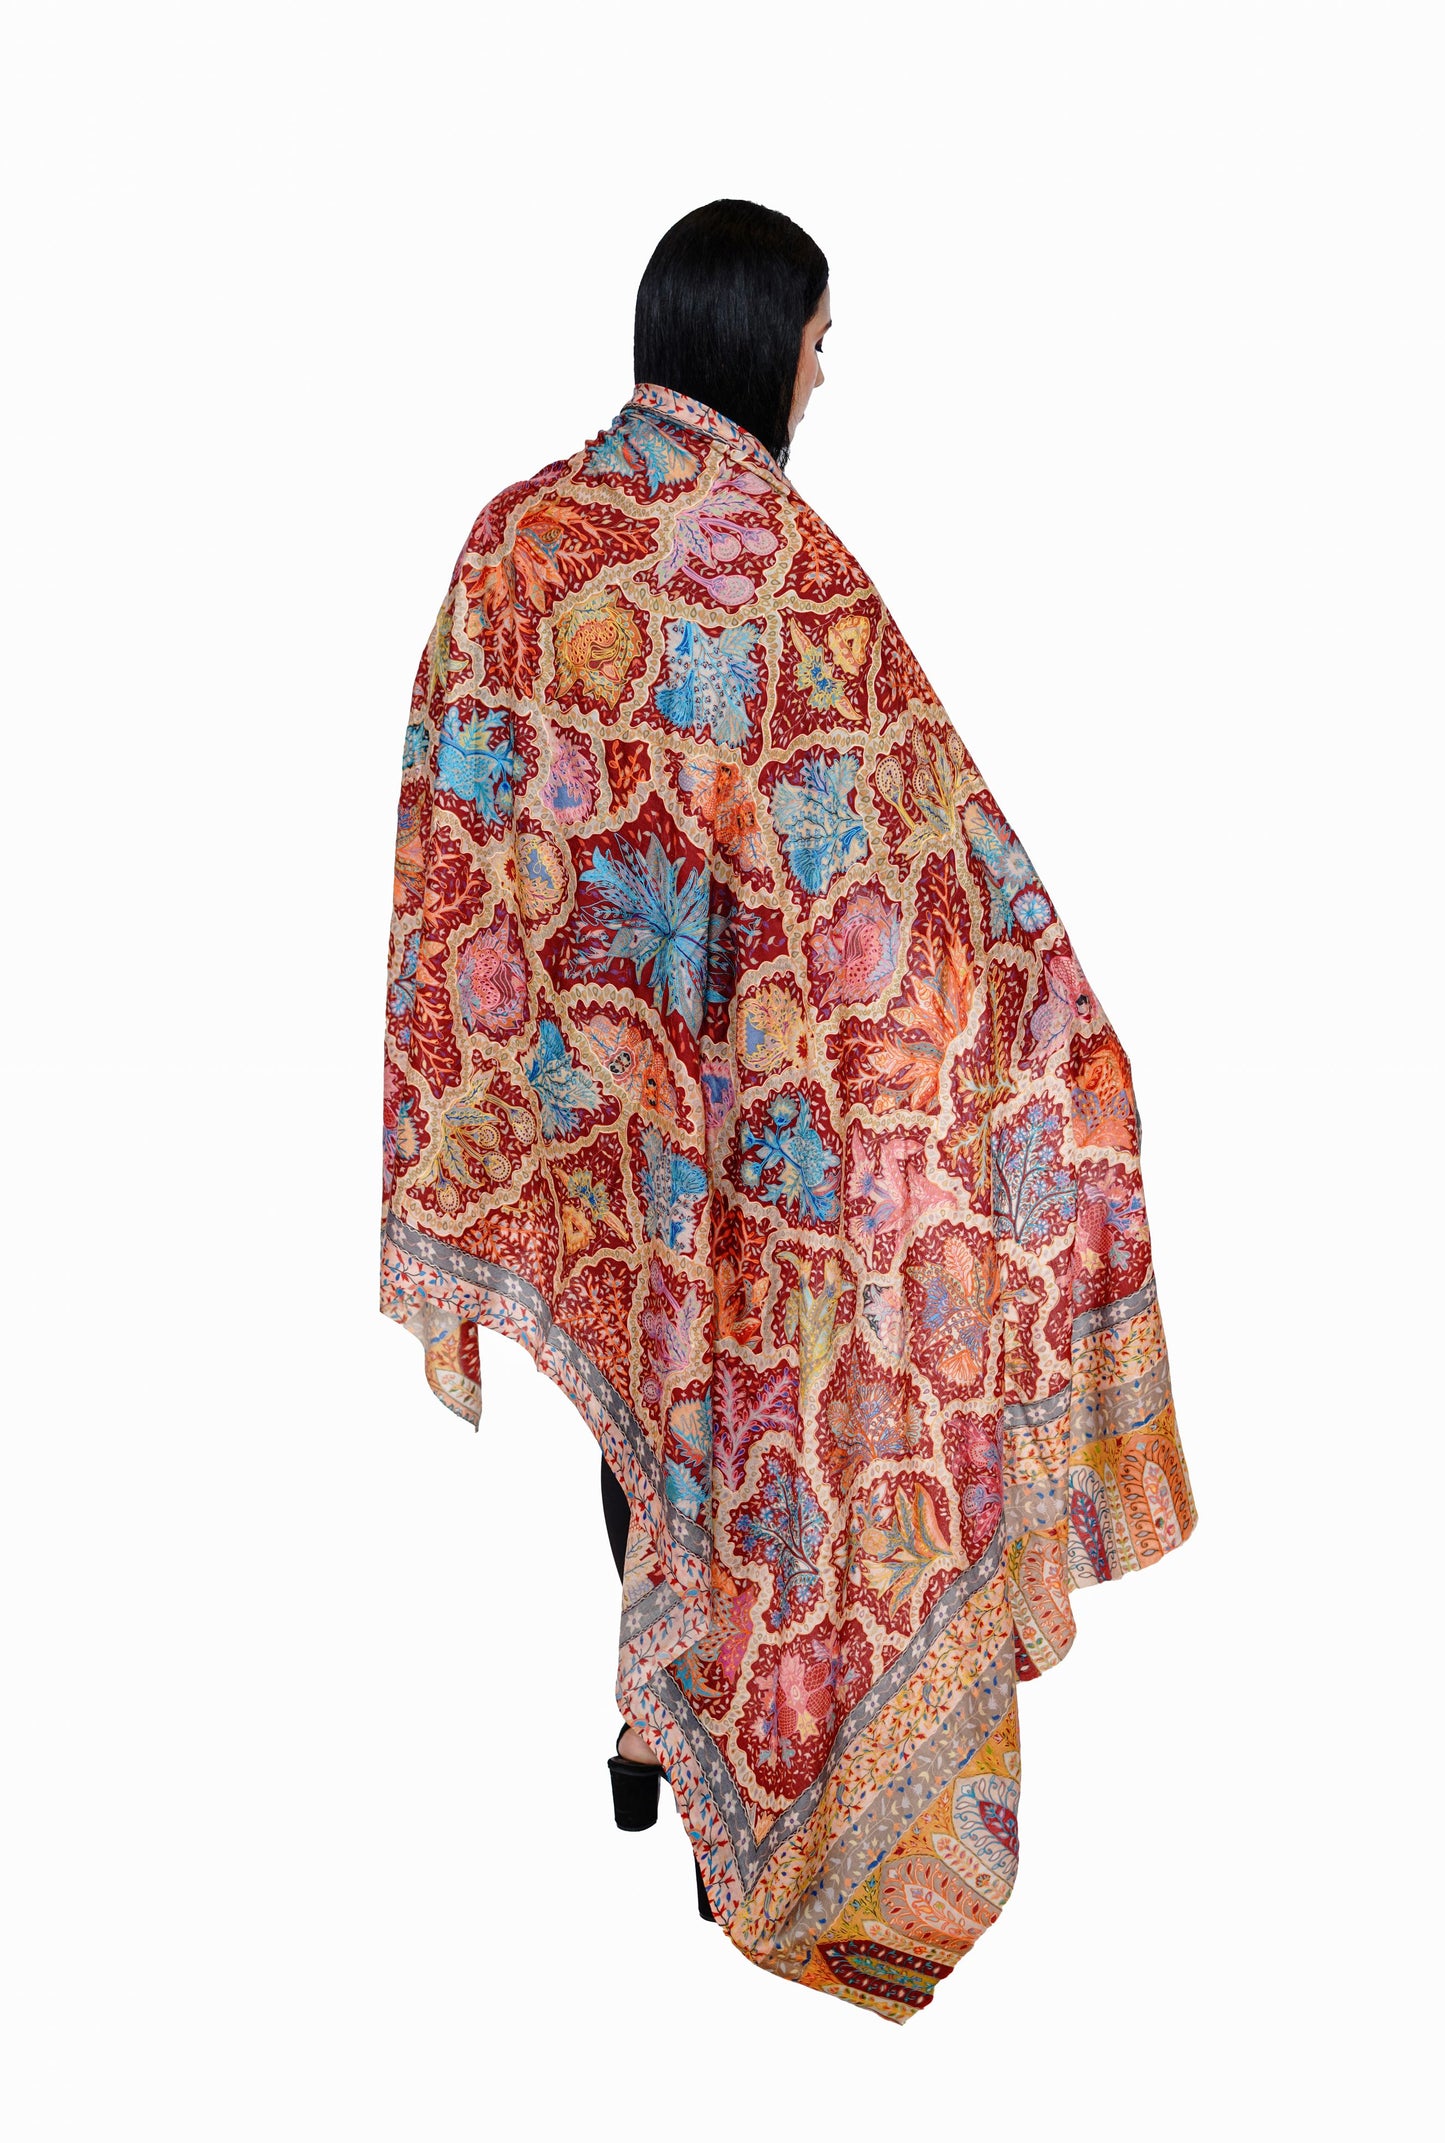 Heritage Rustic Red Hand Embroidered Printed Shawl for Women